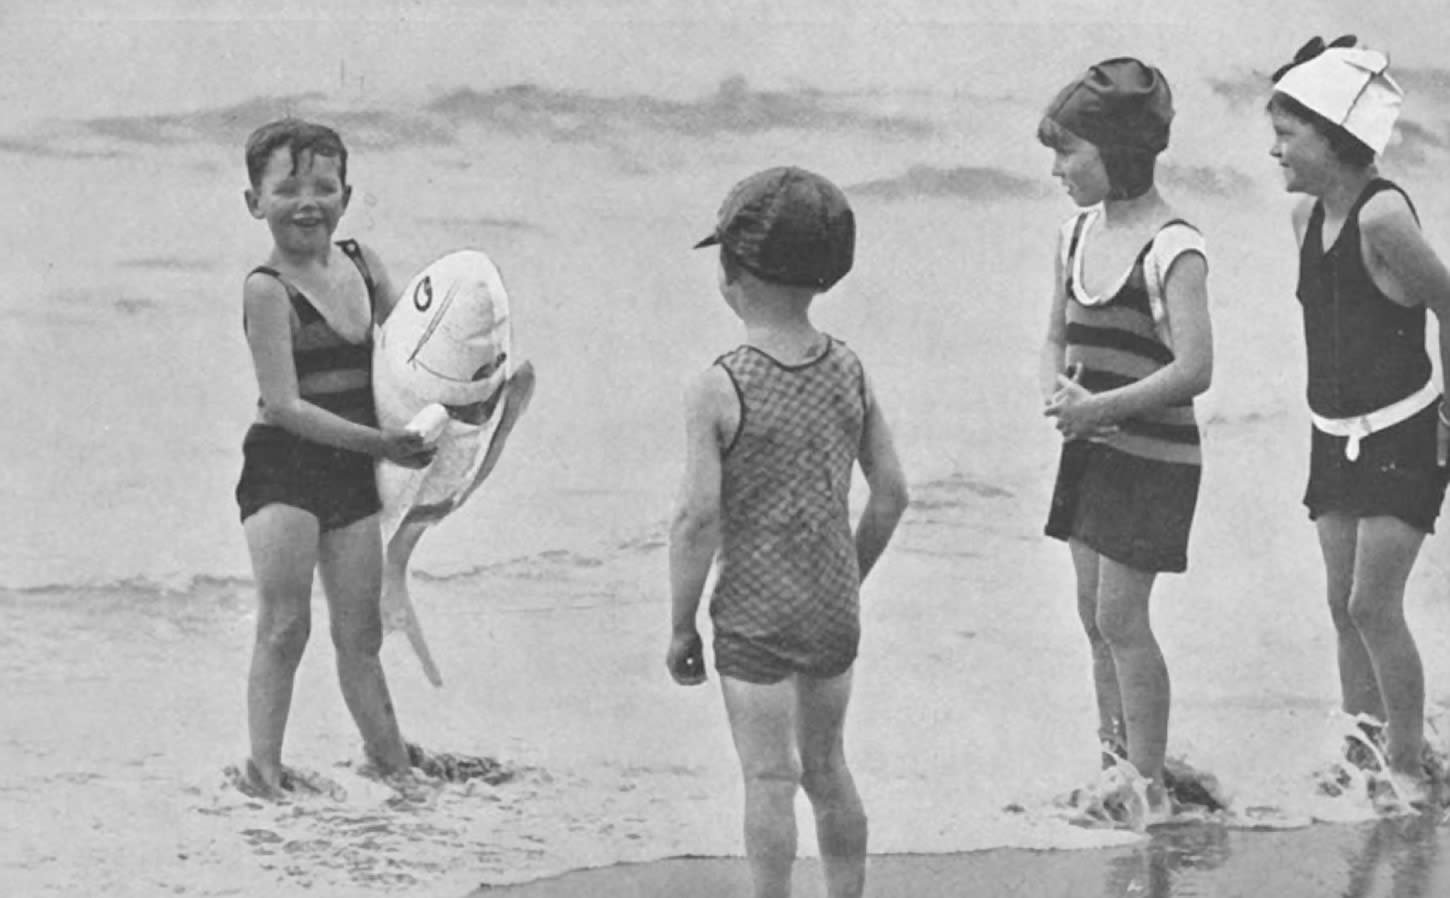 Kingston Beach, 1930. Photo: University of Tasmania Library Special and Rare Materials Collection.